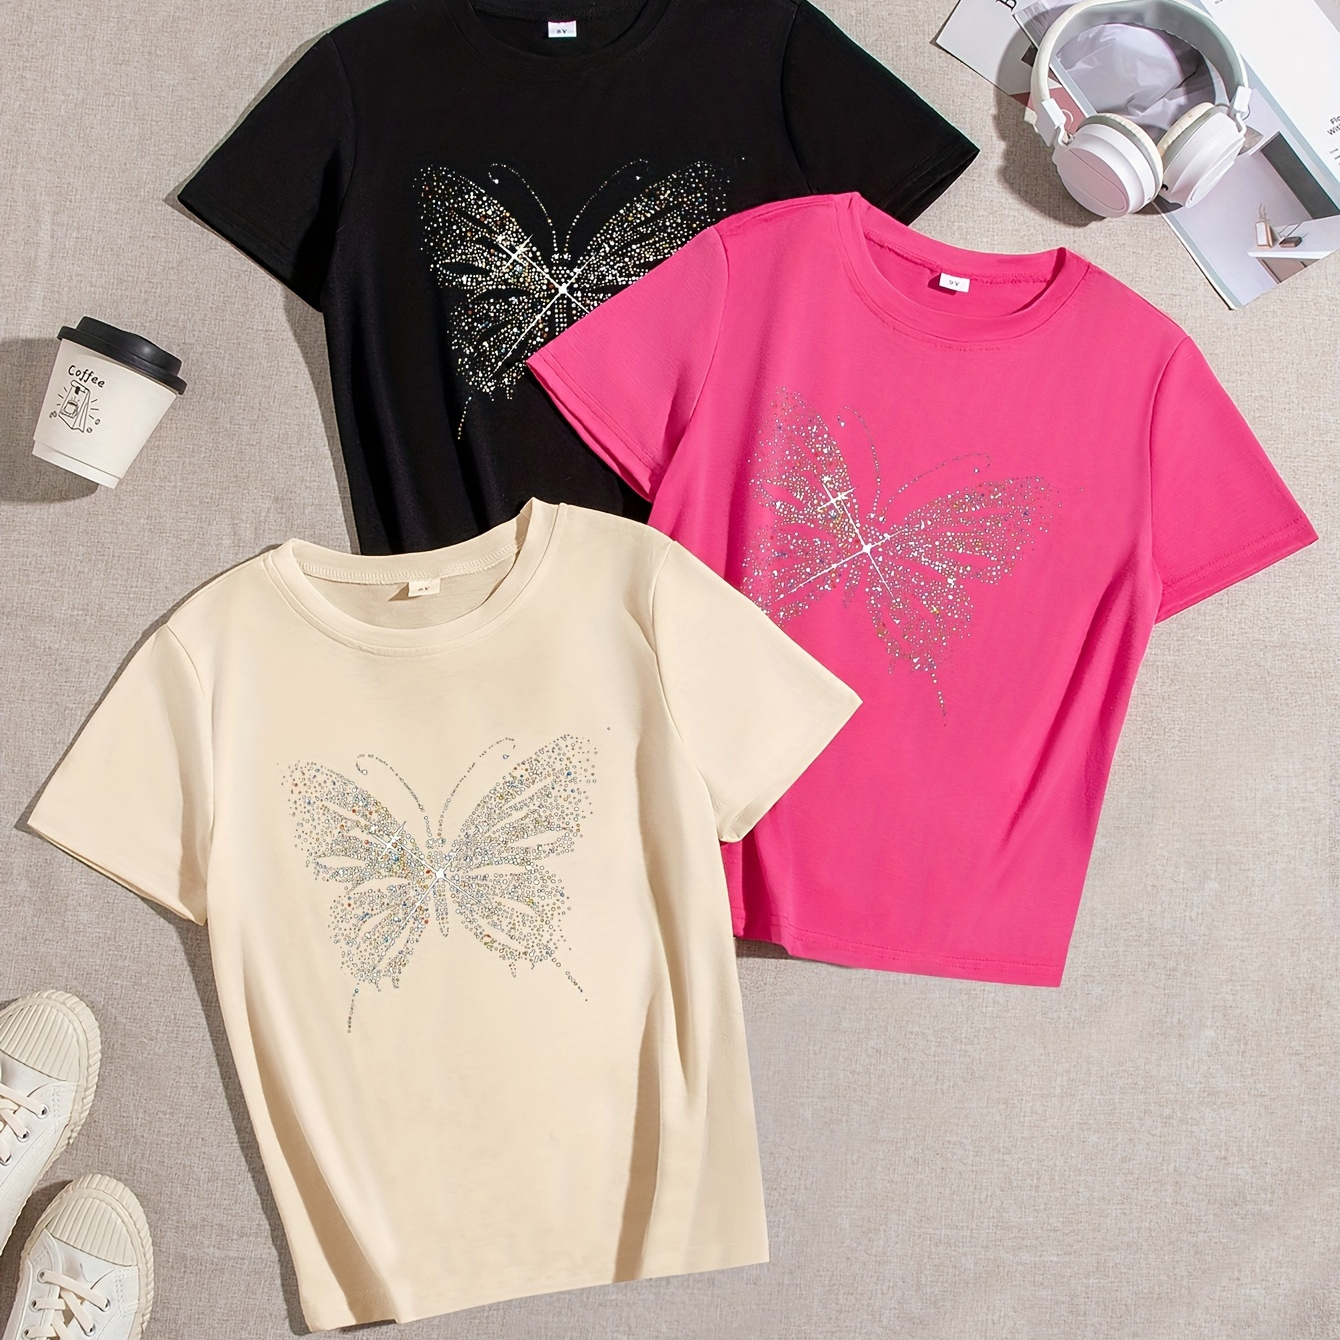 

3-piece Girls' Summer Fashion Printed Short Sleeve T-shirts, Casual Round Neck Tees With Cartoon Butterfly Graphic, Assorted Colors - Trendy Tops For Daily Wear